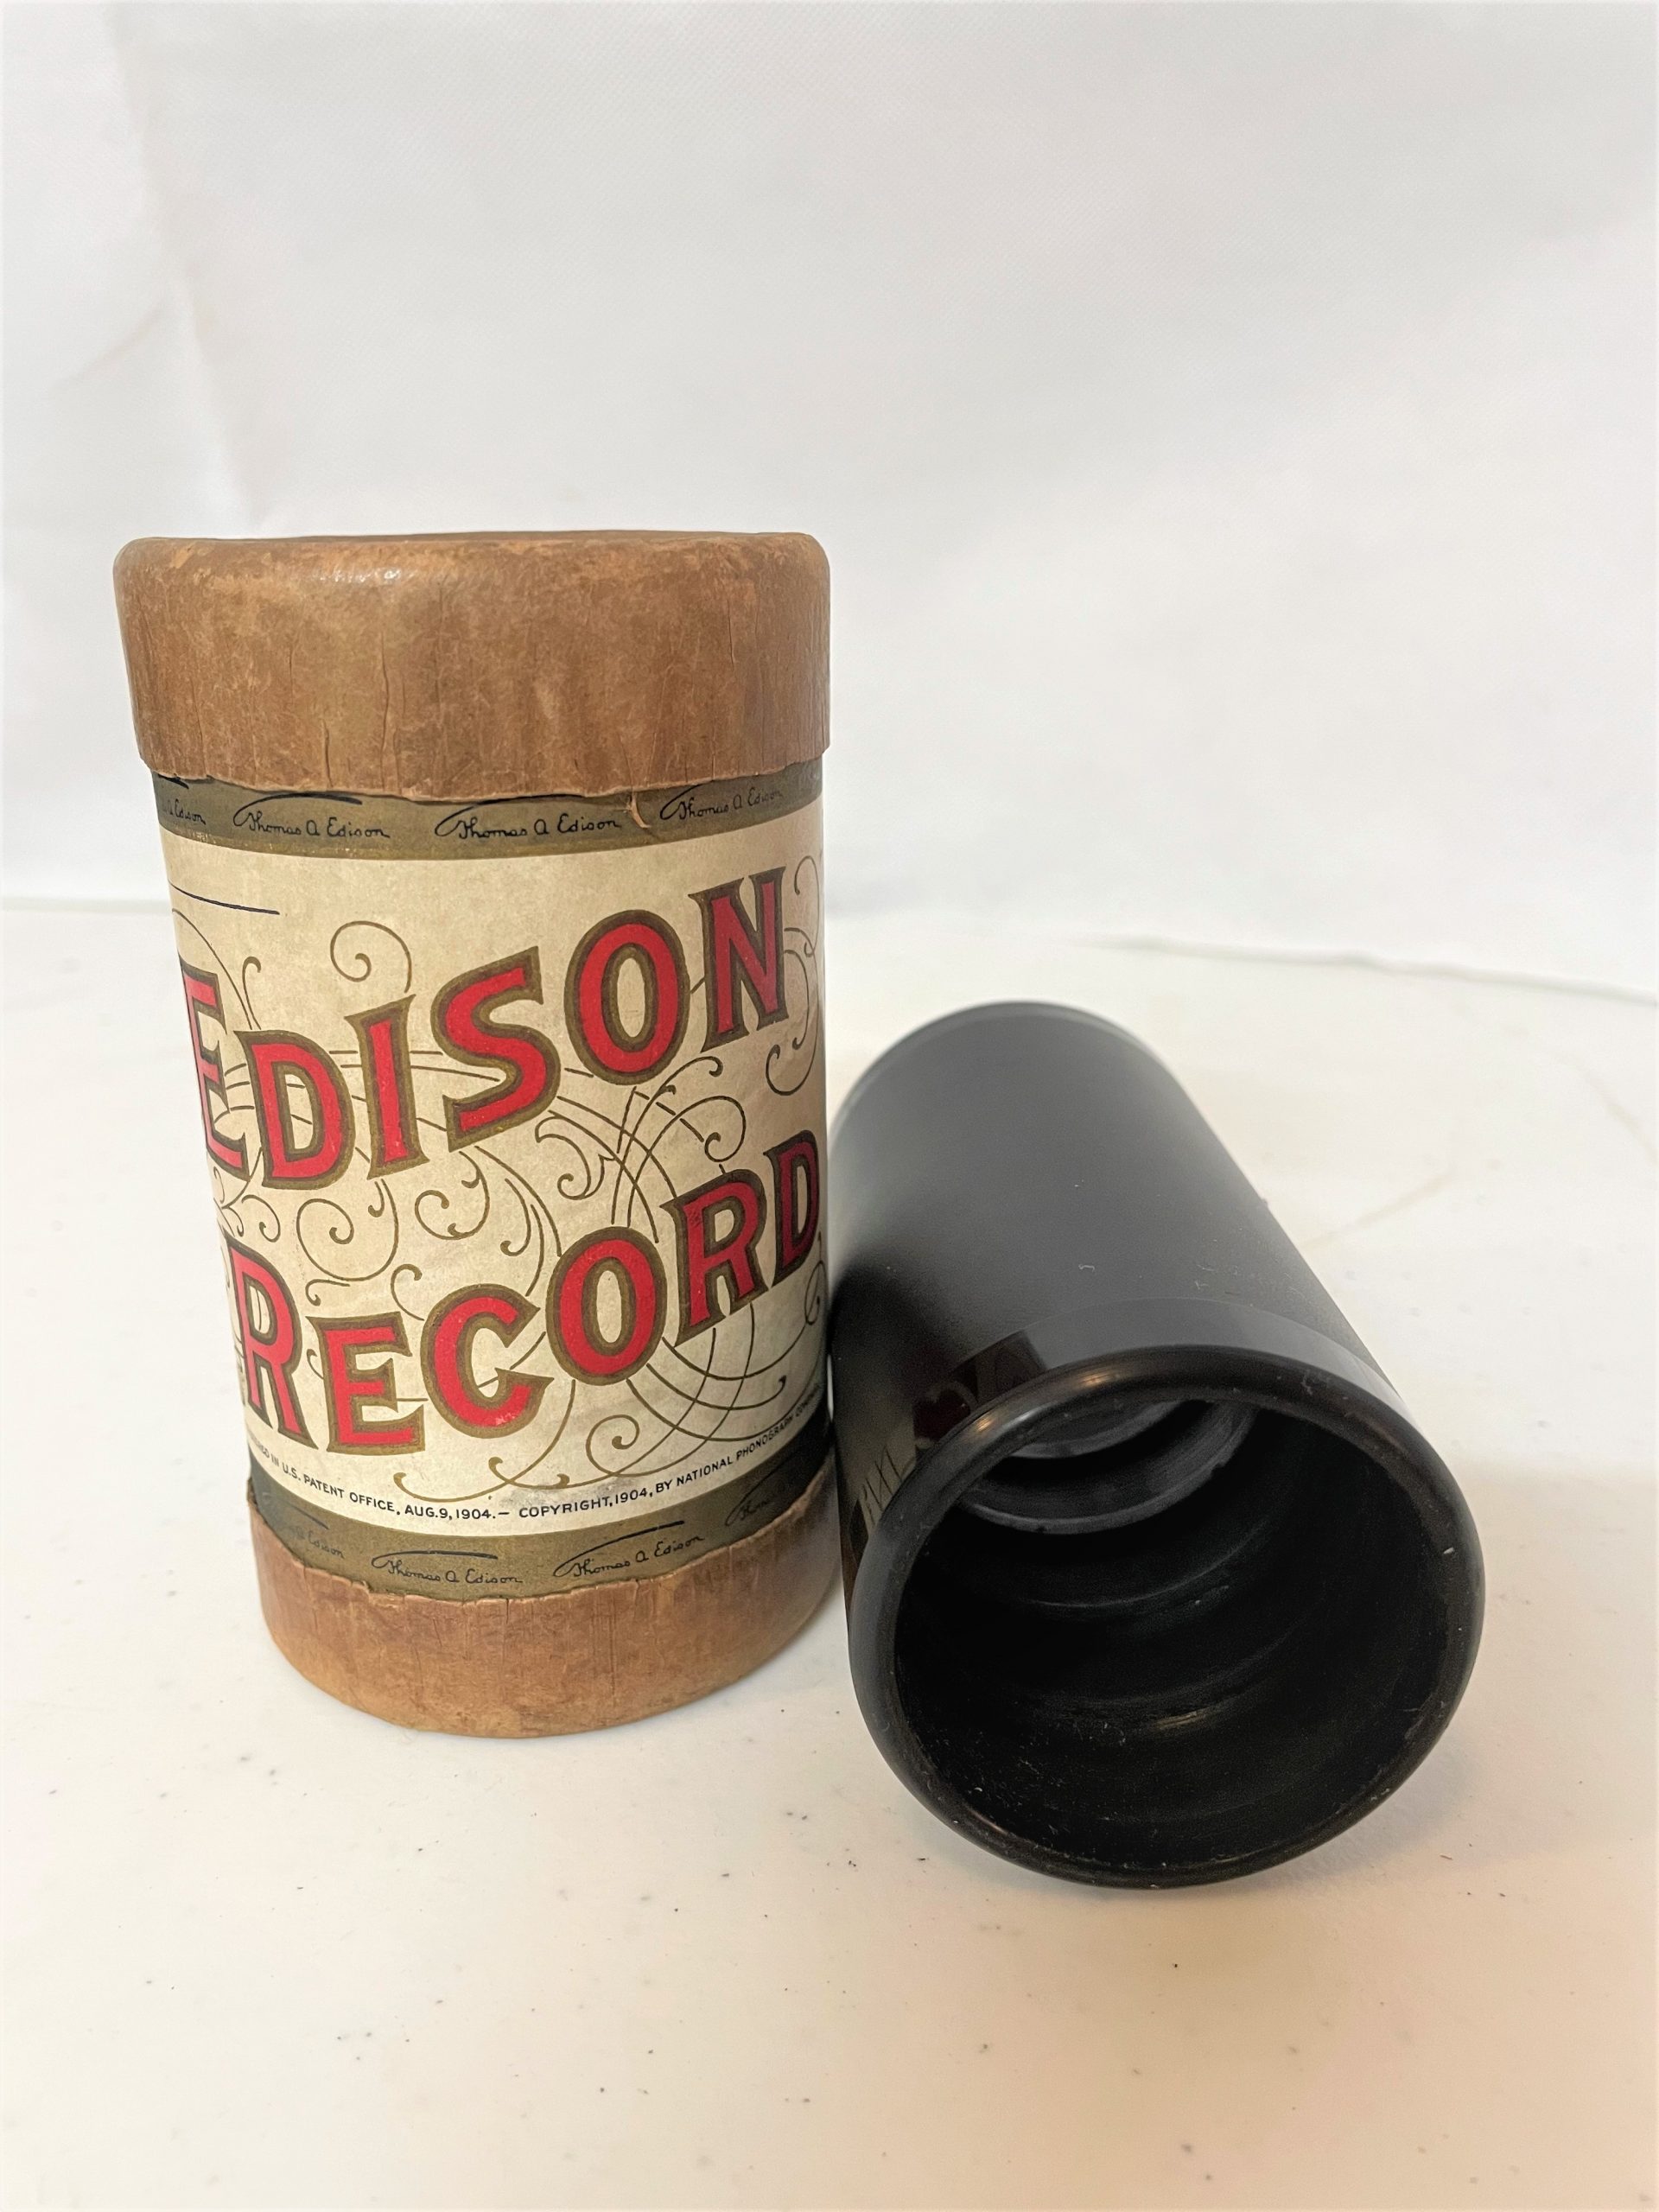 Edison 2 minute cylinder… “What makes the World go Round”